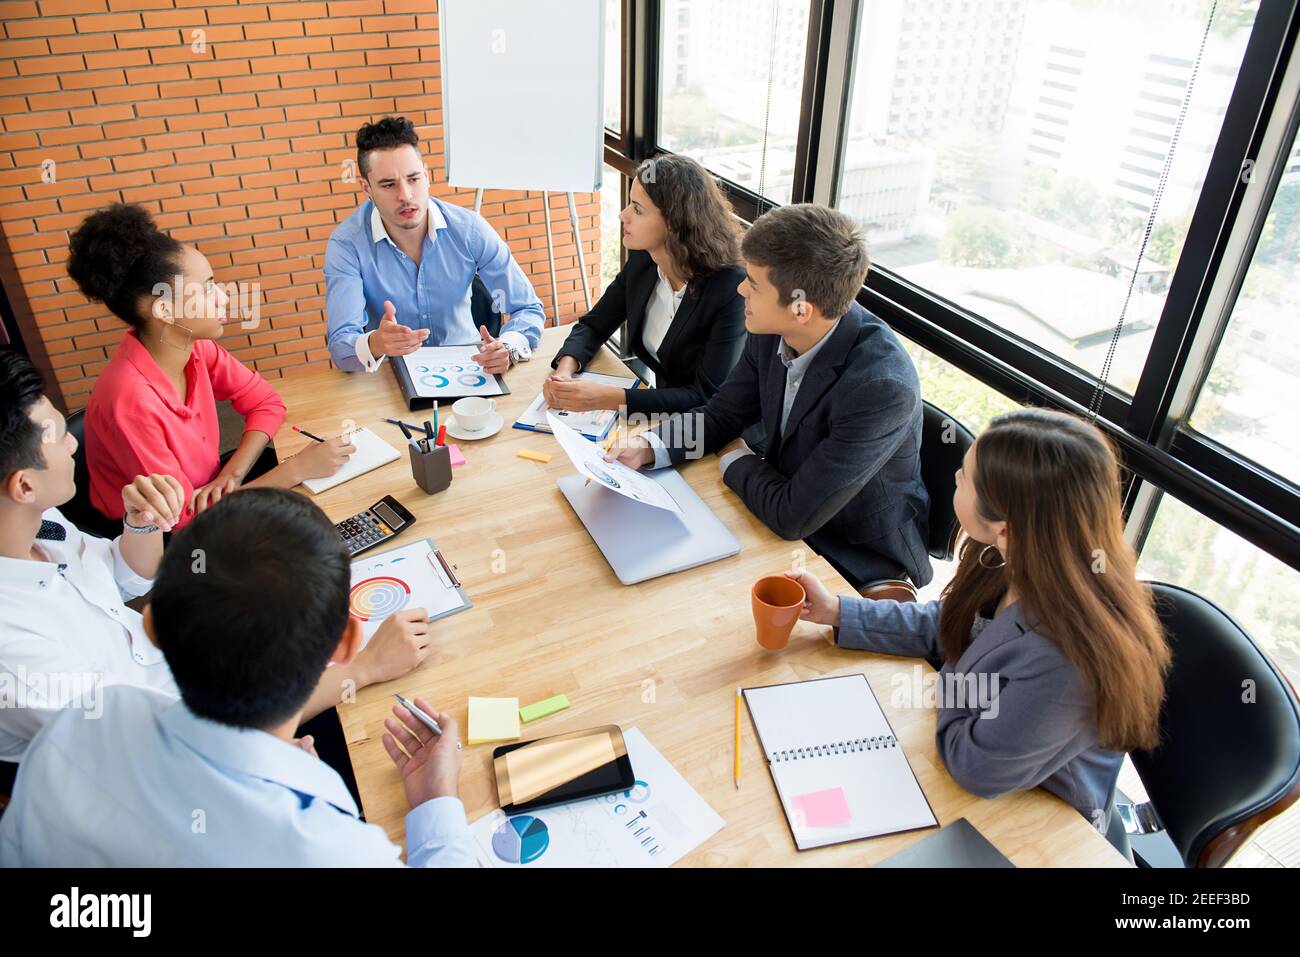 Group of multiethnic business people brainstorming in the meeting room Stock Photo